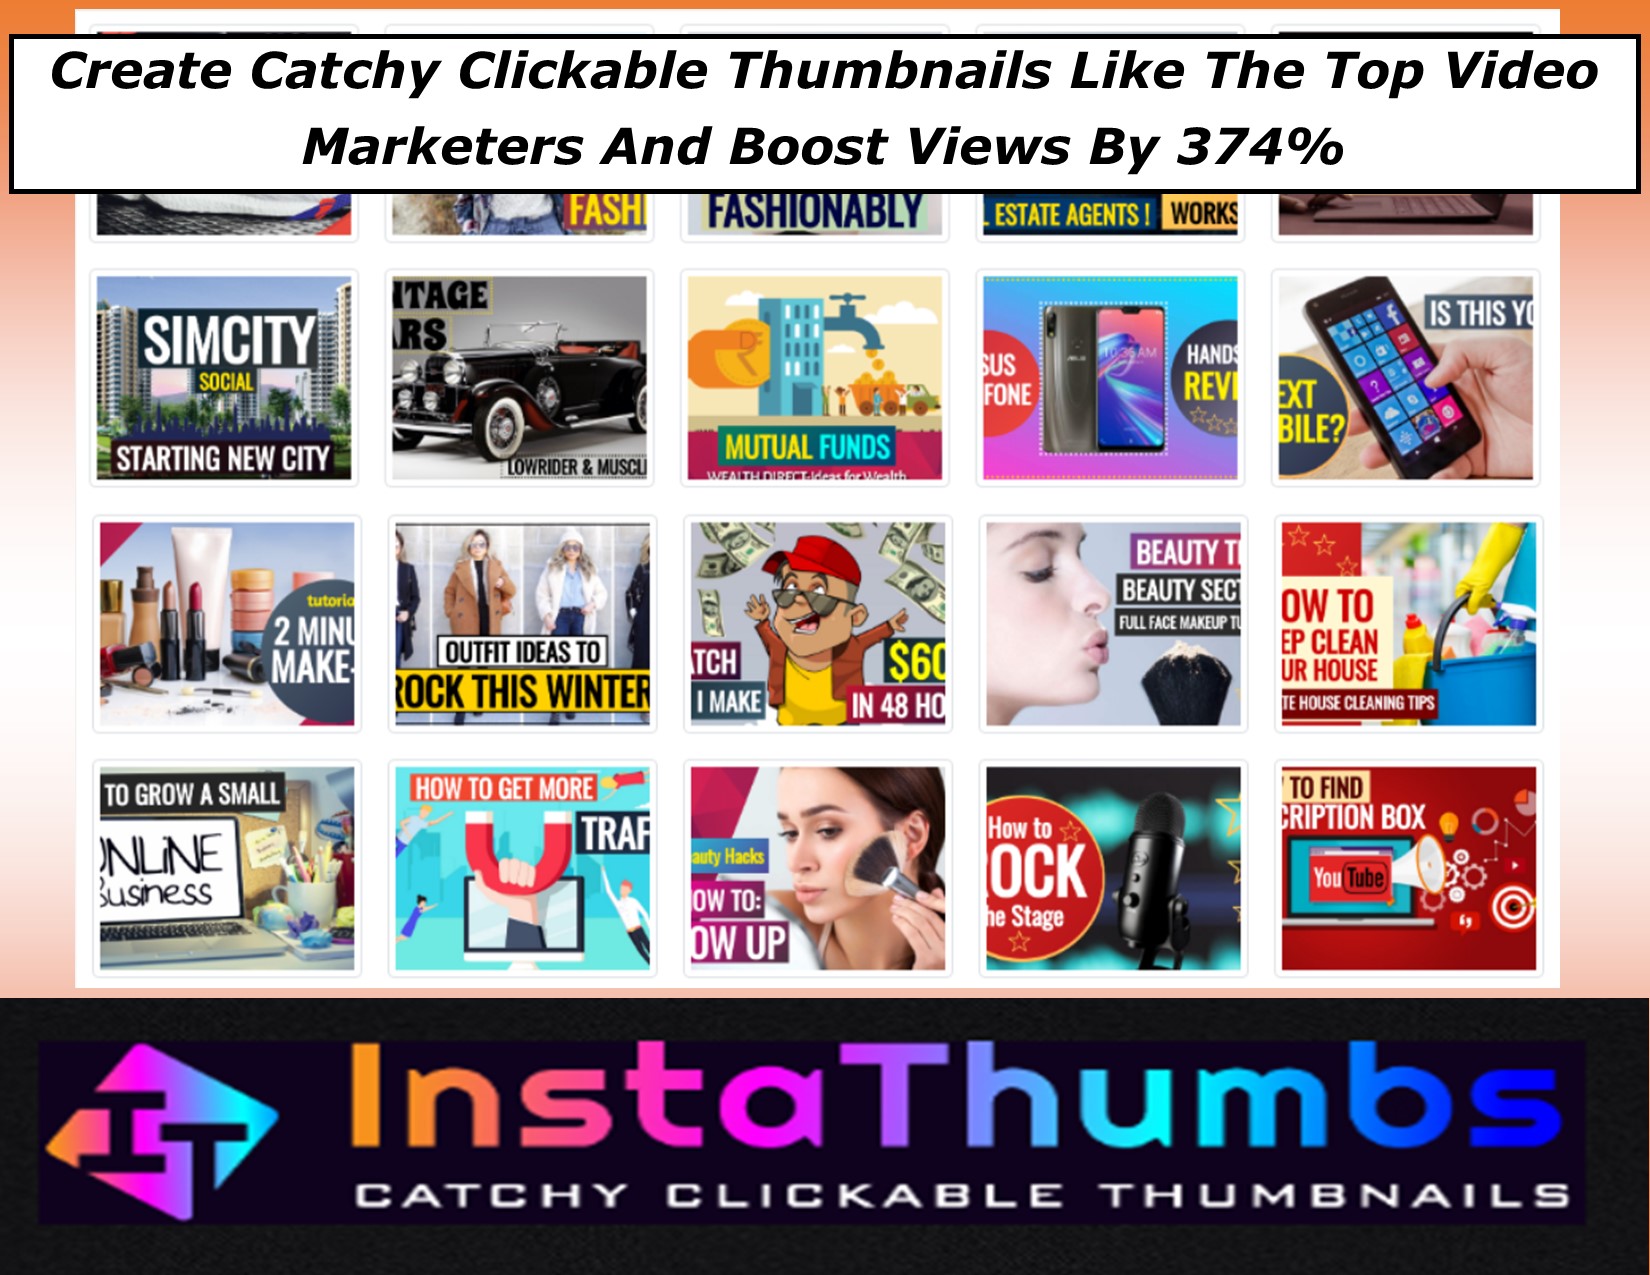 InstaThumbs Catchy Clickable Thumbnails